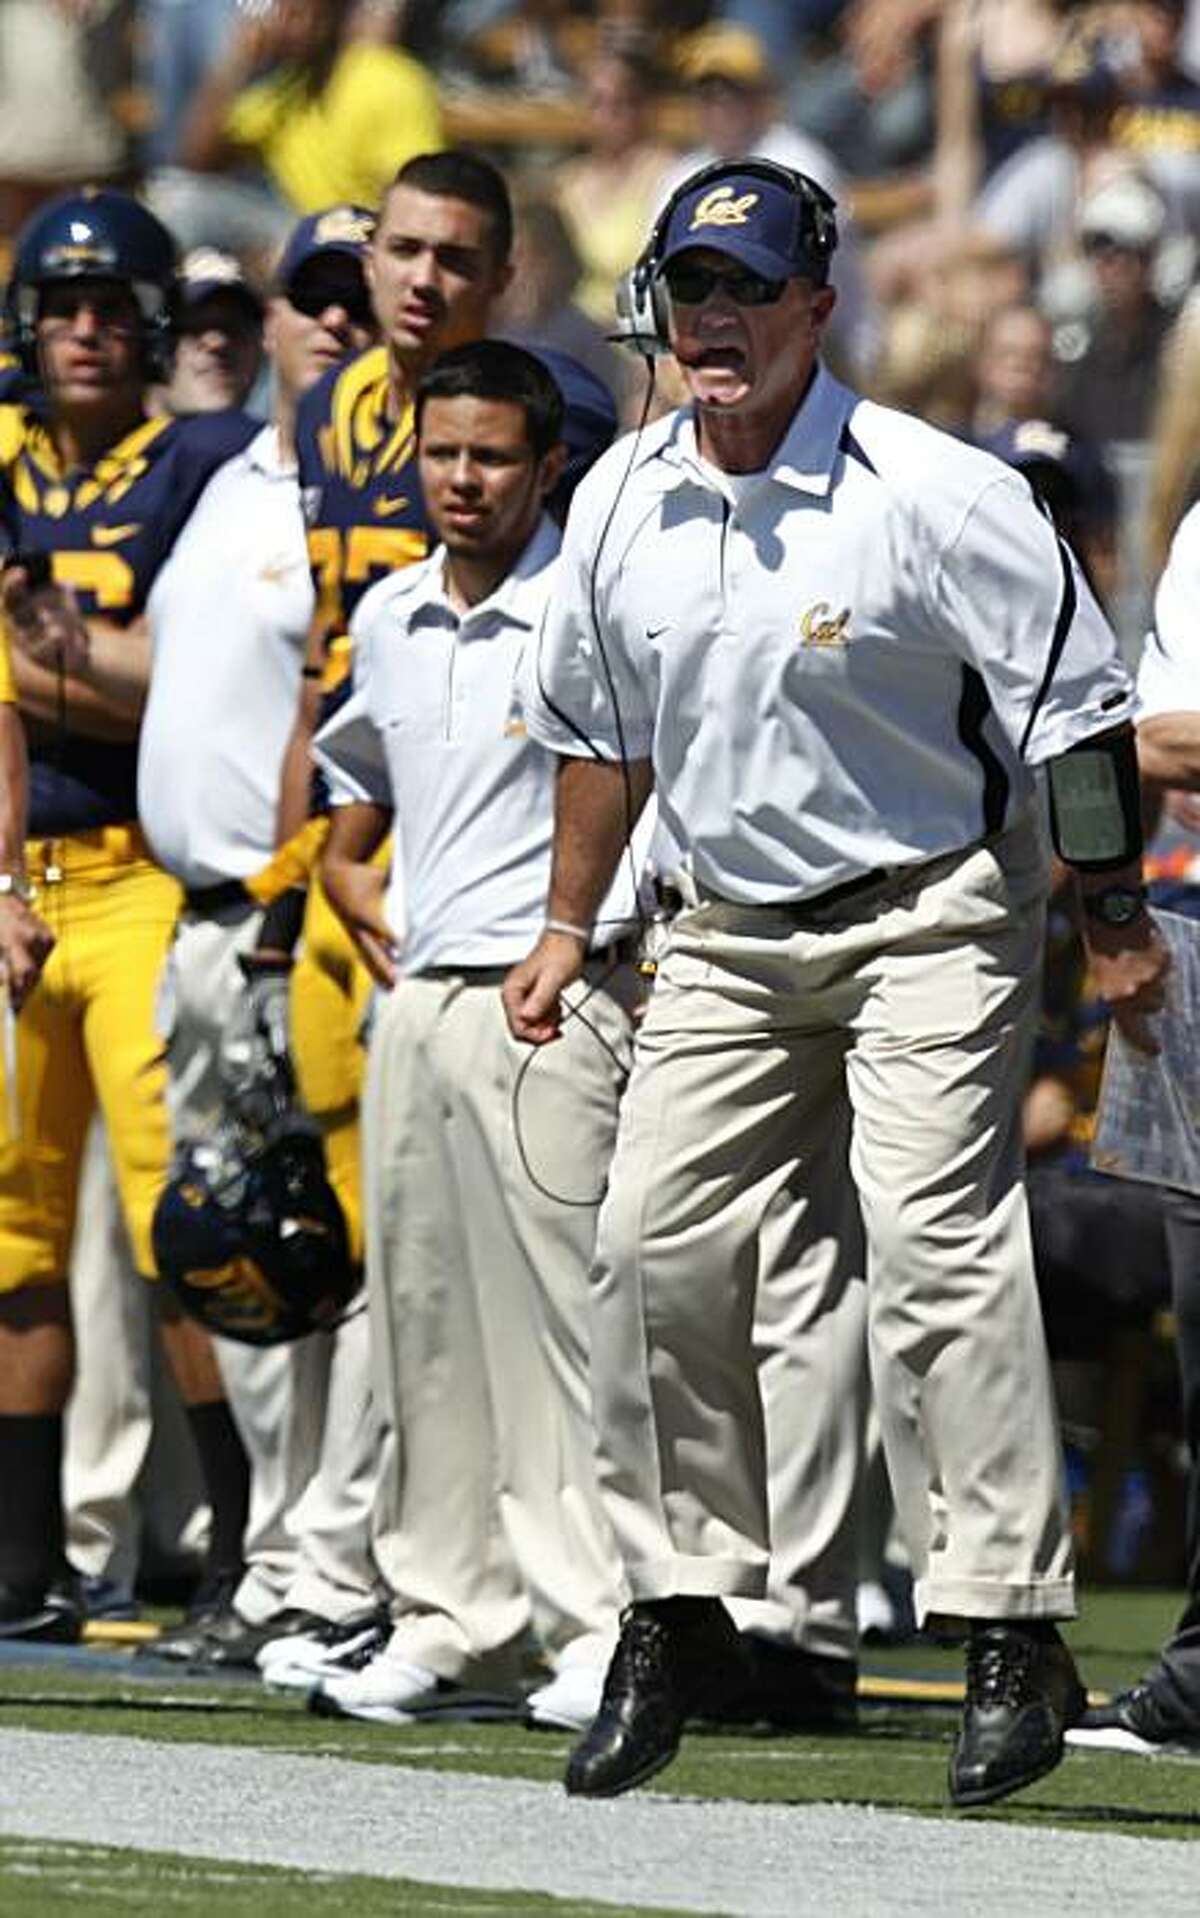 Cal head coach Jeff Tedford reacts to a non-call during a kick-off in the first half of the Bears' game against the Colorado Buffaloes in Berkeley on Saturday.